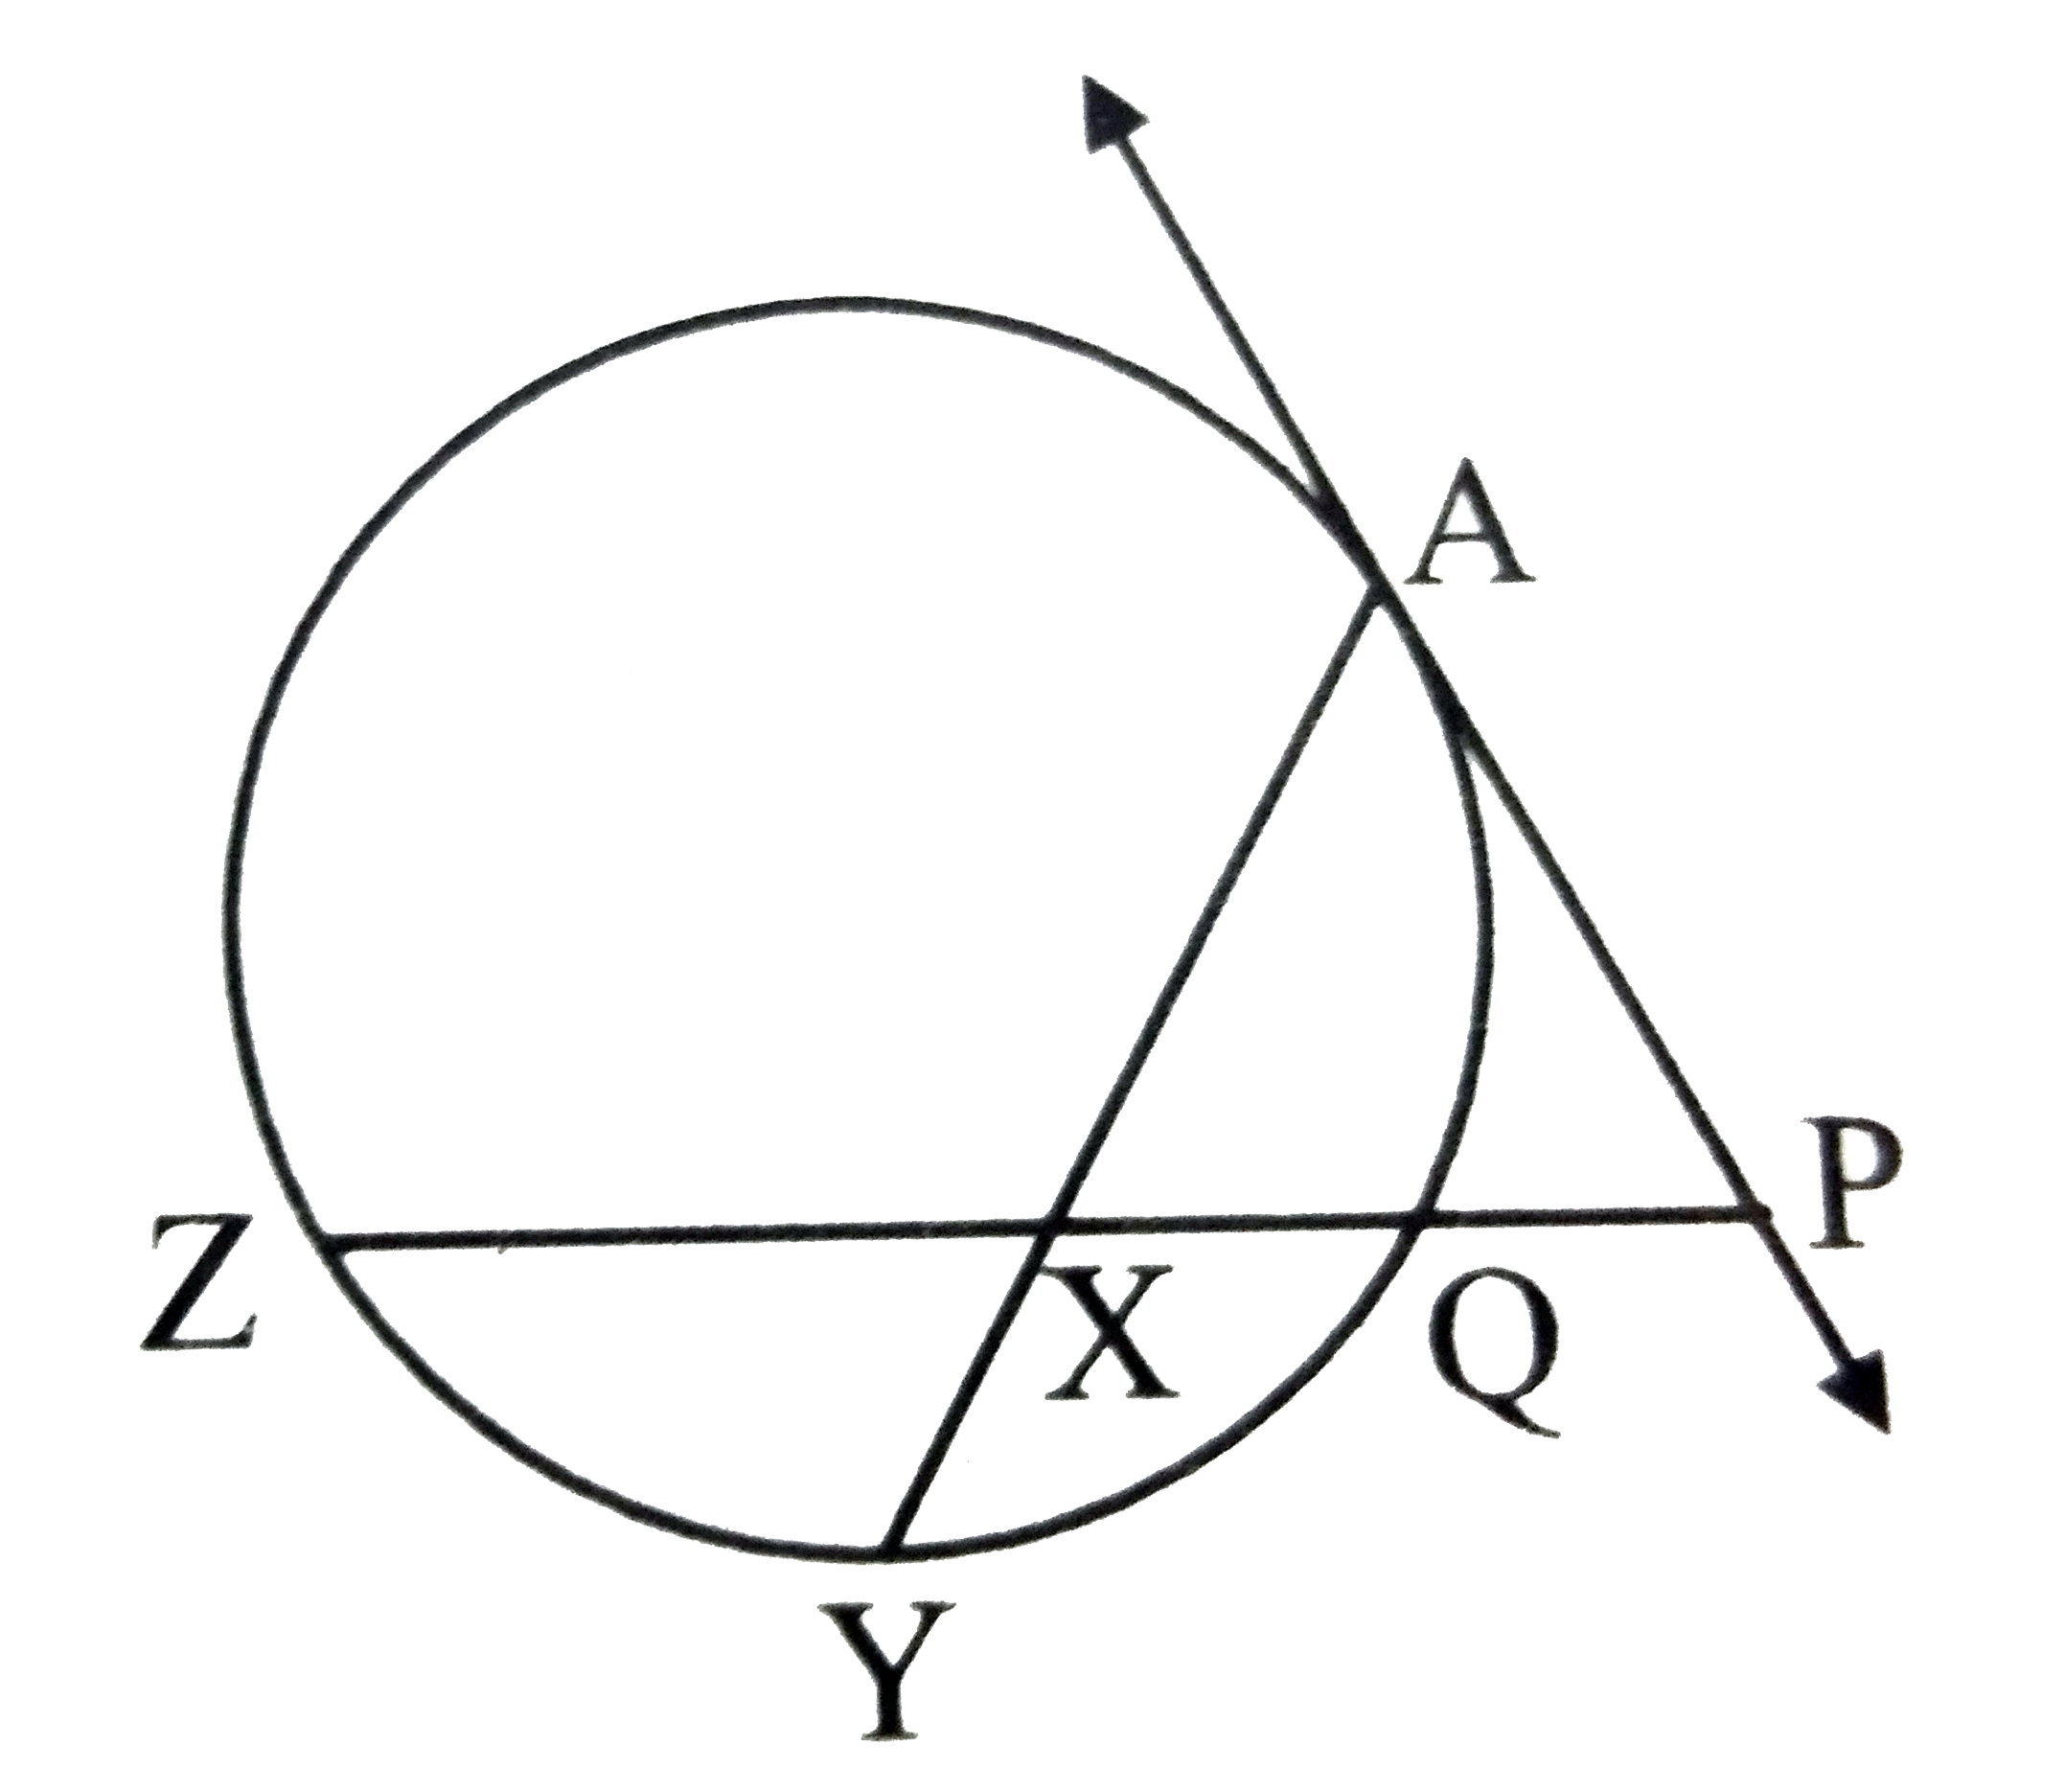 In the adjoining figure, line AP is tangent to the circle at A, secant through  P intersects chord AY in point X such that AP=PX=XY.   IF PQ=1 and QZ=8, then find AX.